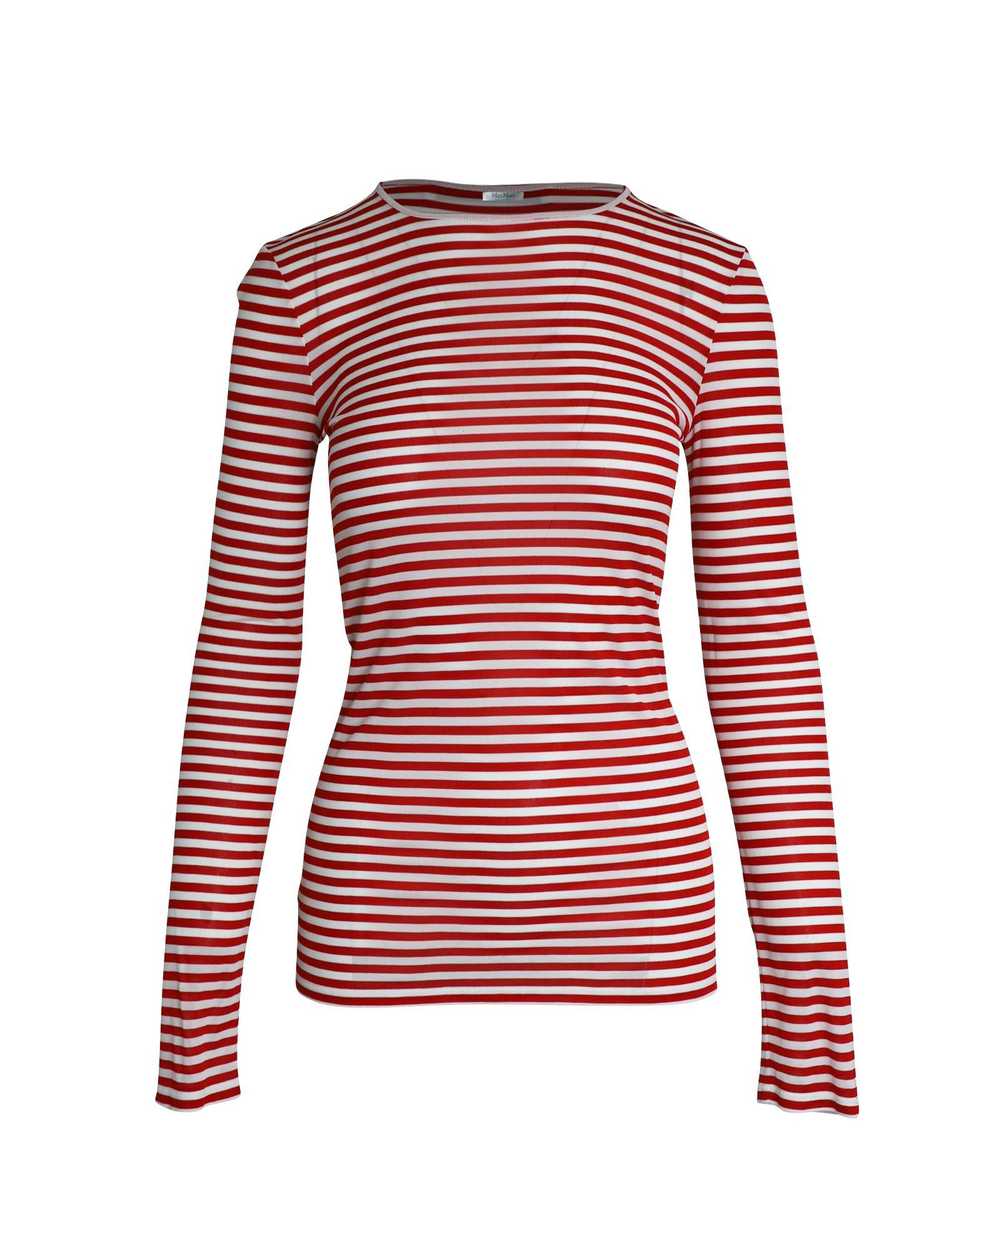 Max Mara Striped Long Sleeve Top in Red and White… - image 1